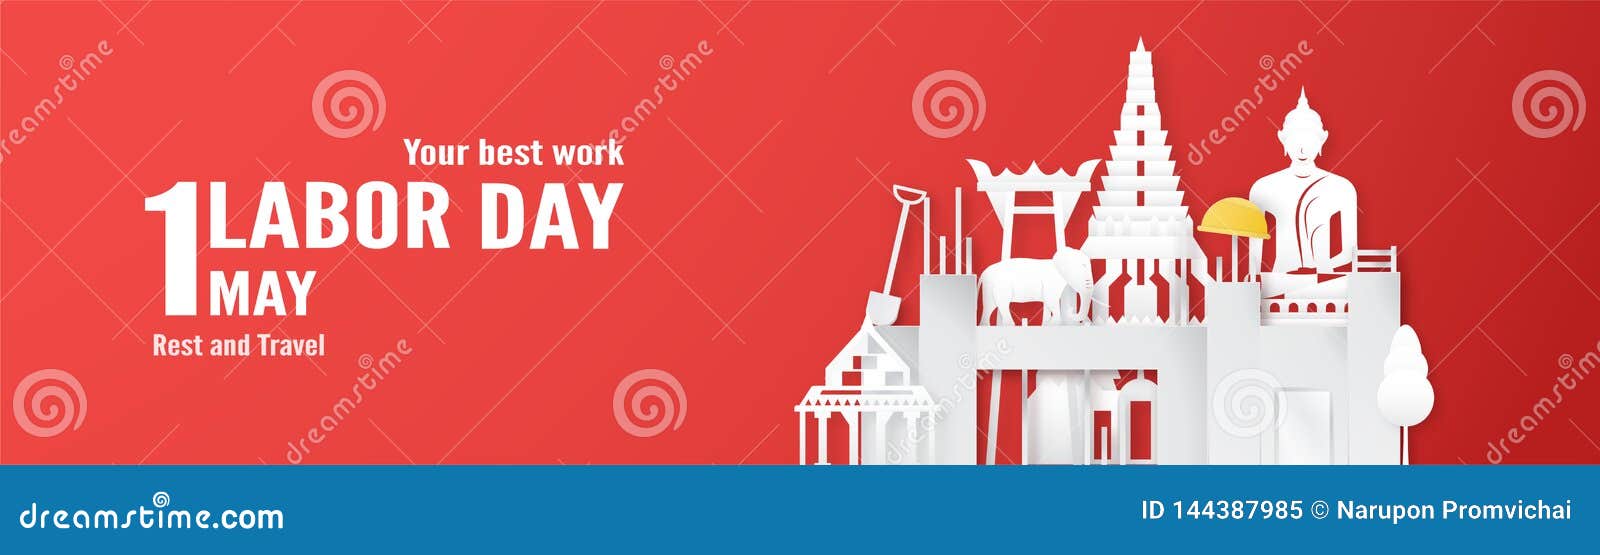 Happy Labor day on 1 May of years. Template design for banner, poster, cover, advertisement, website. Vector illustration in paper cut and craft style on red background